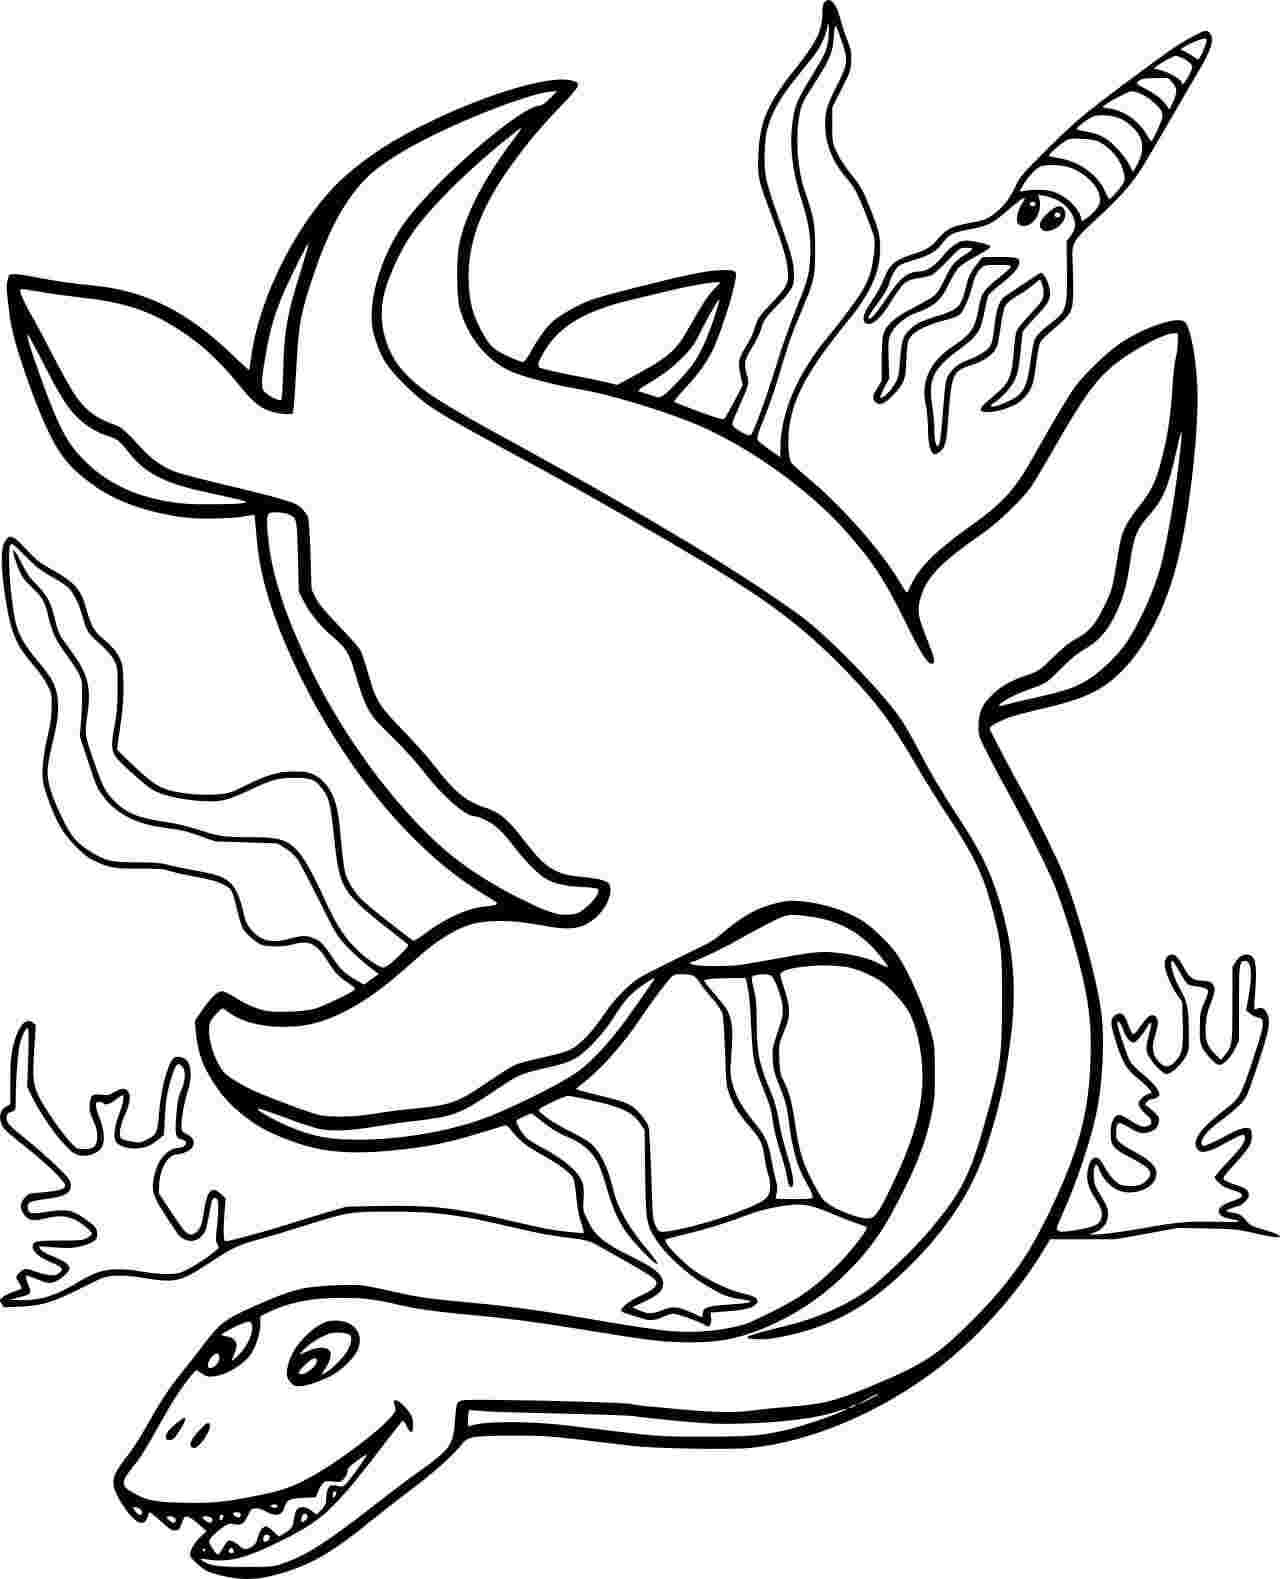 Plesiosaurus Dinosaur in the sea Coloring Pages